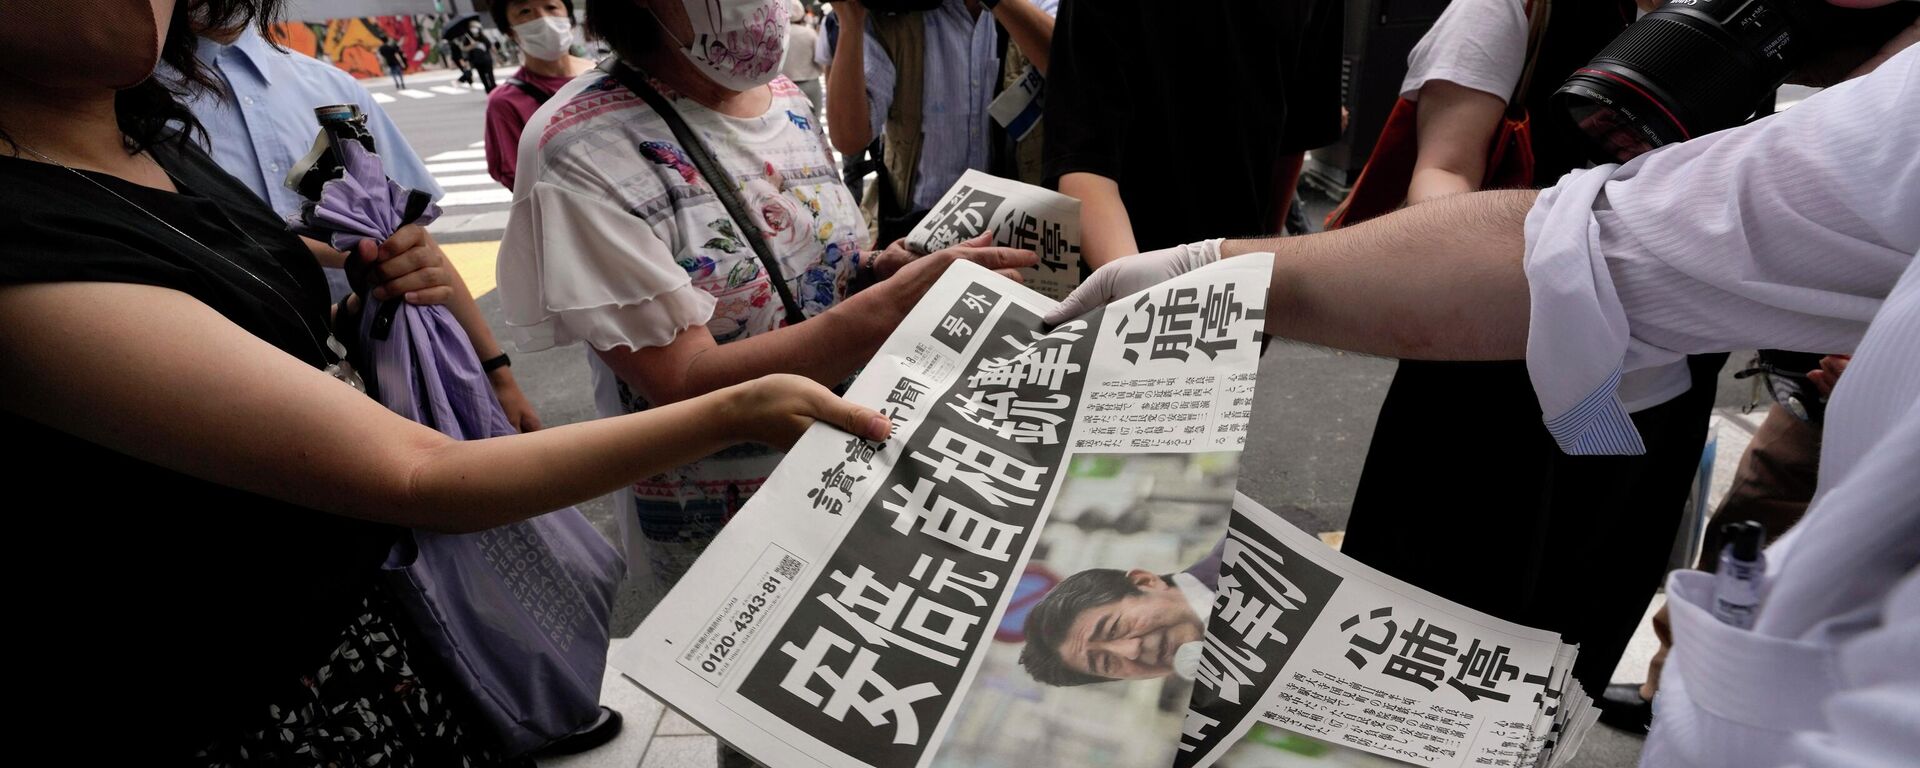 An employee distributes extra editions of the Yomiuri Shimbun newspaper reporting on Japan's former Prime Minister Shinzo Abe was shot, Friday, July 8, 2022, in Tokyo. Japan's former Prime Minister Shinzo Abe was shot during a campaign speech Friday in western Japan and was airlifted to a nearby hospital but he was not breathing and his heart had stopped, officials said.  - Sputnik International, 1920, 10.07.2022